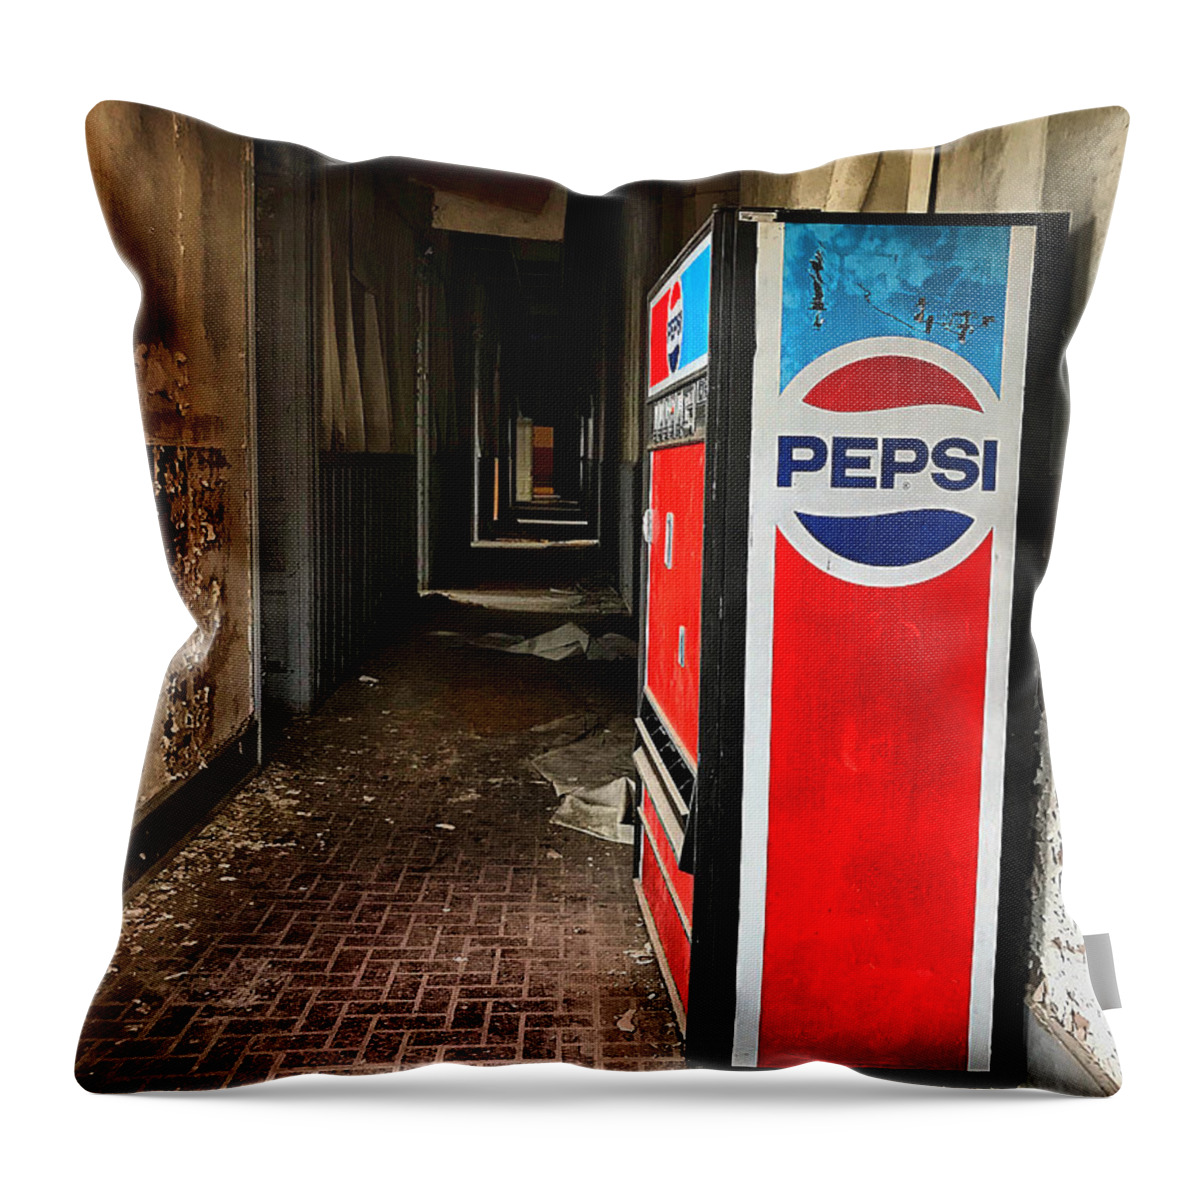  Throw Pillow featuring the photograph Pepsi by Stephen Dorton